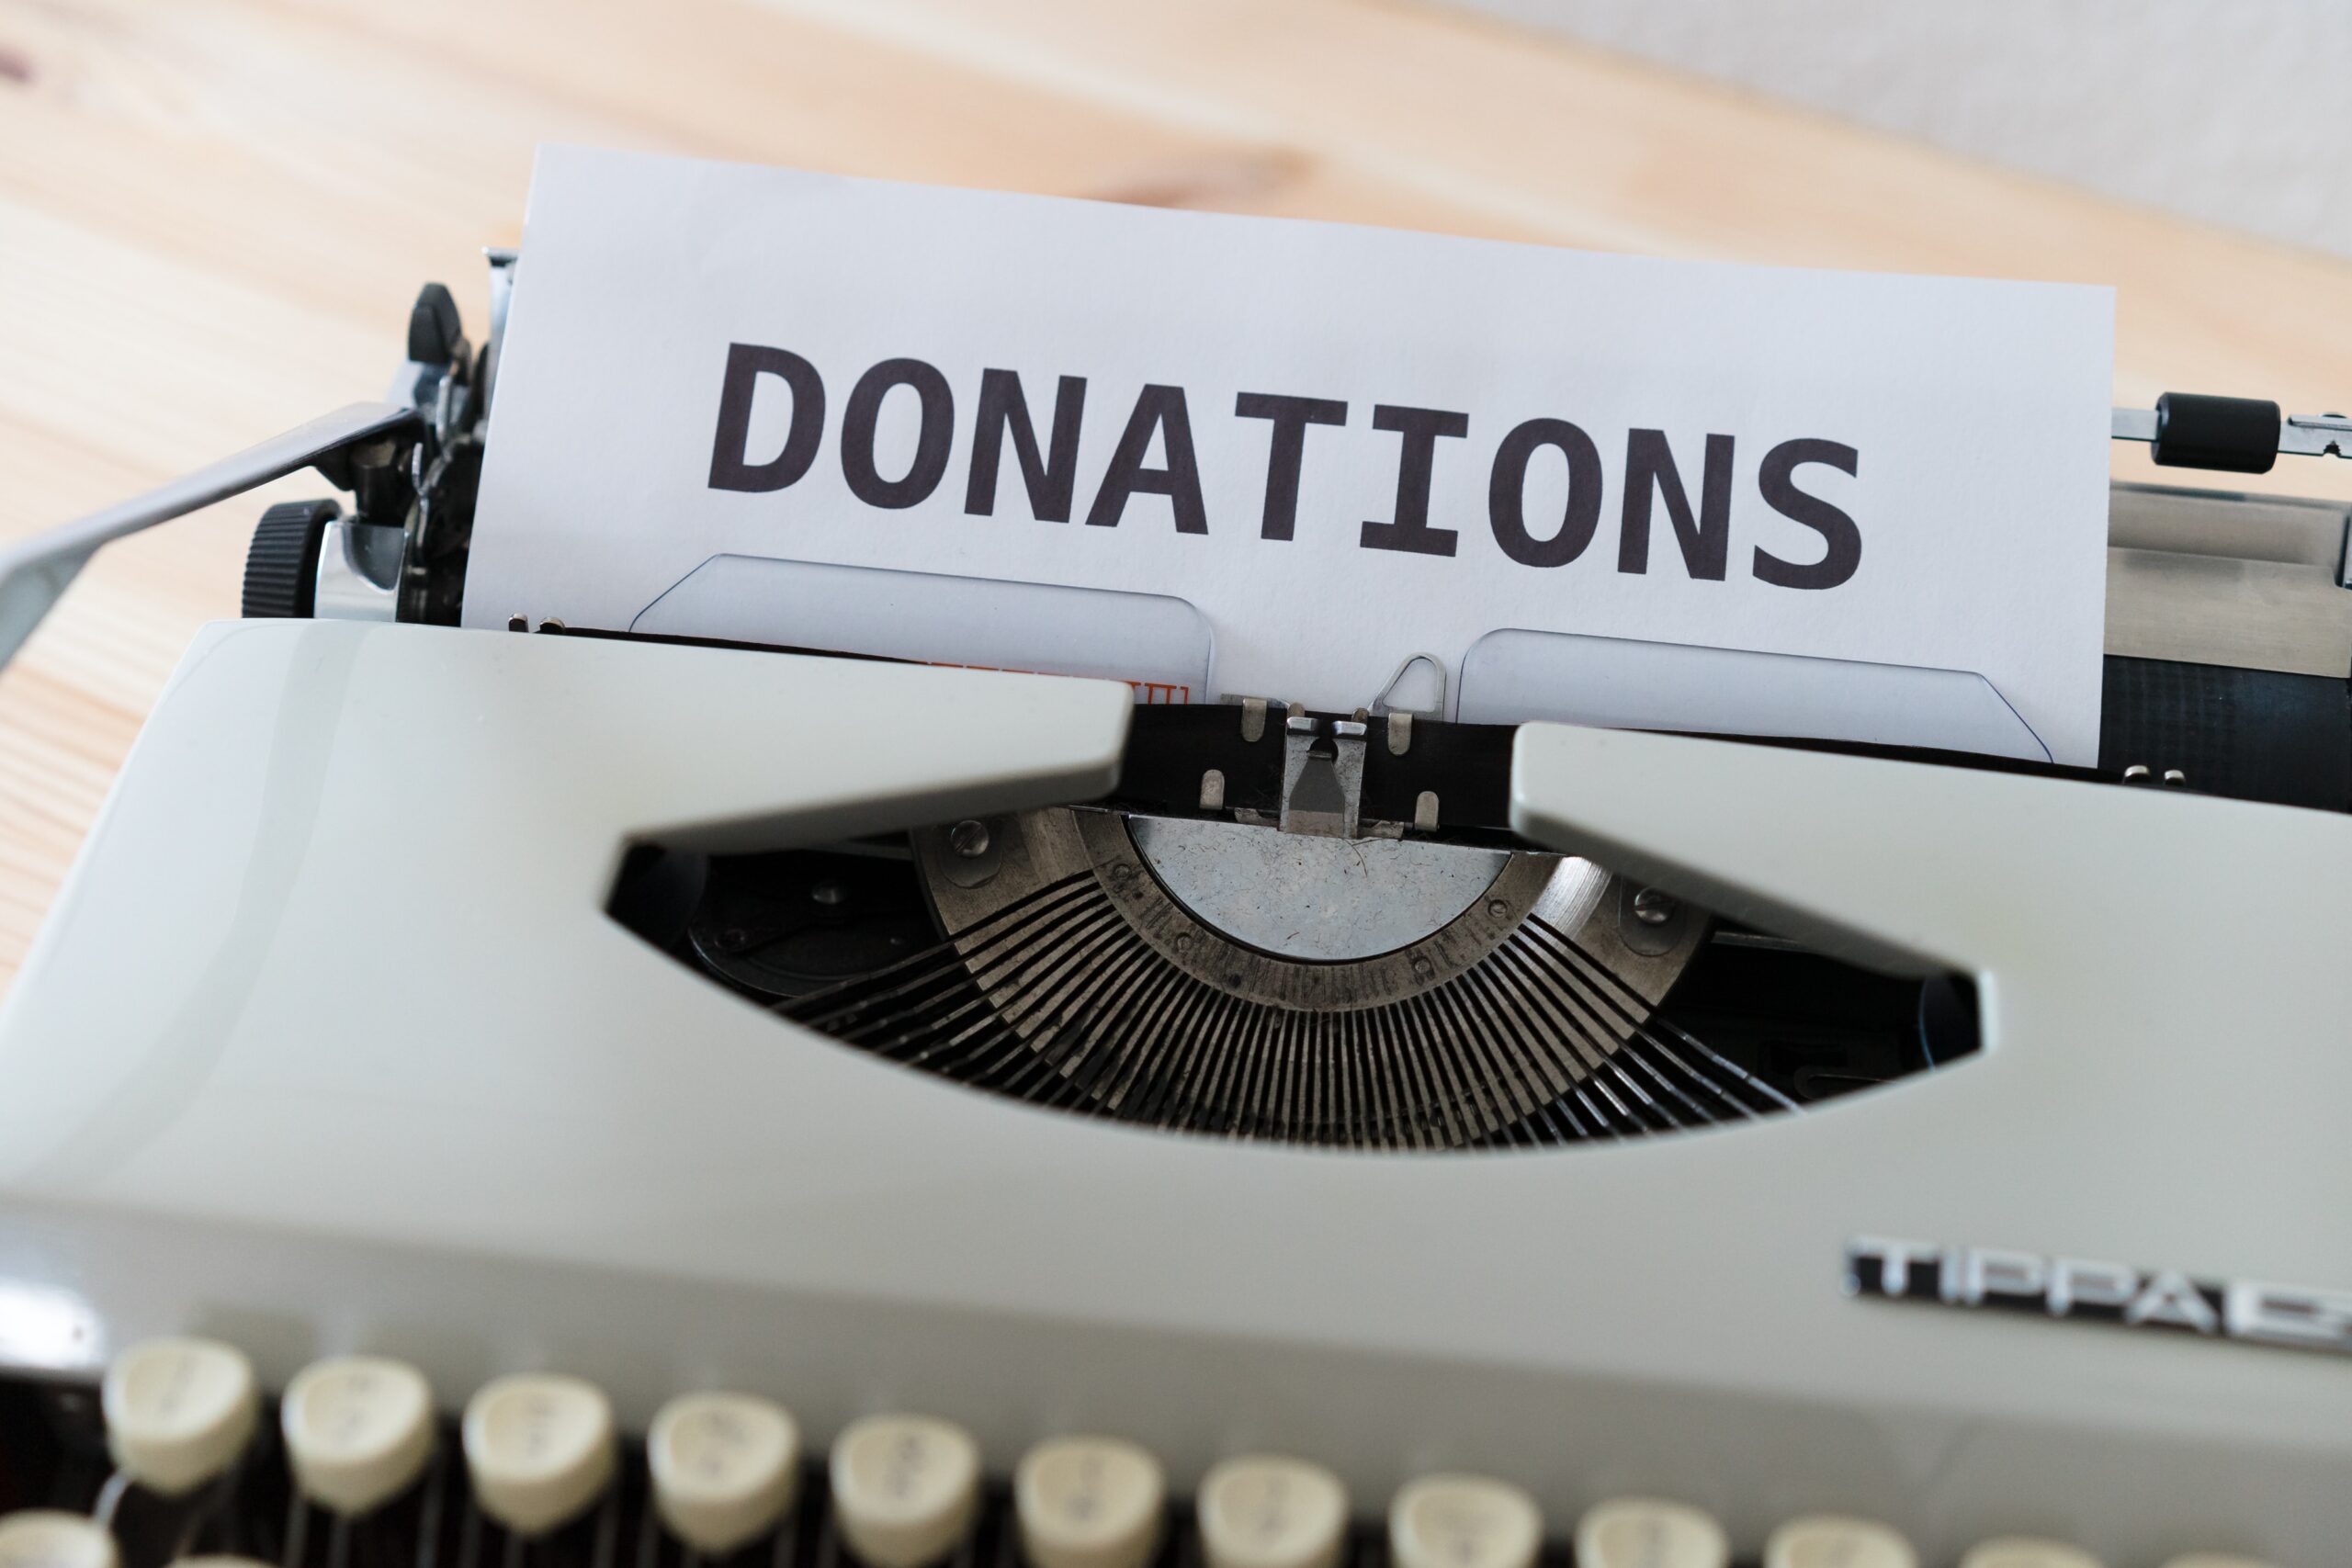 image showing a typewriter loaded with paper where the heading DONATIONS has been written to support fundraising automation content.